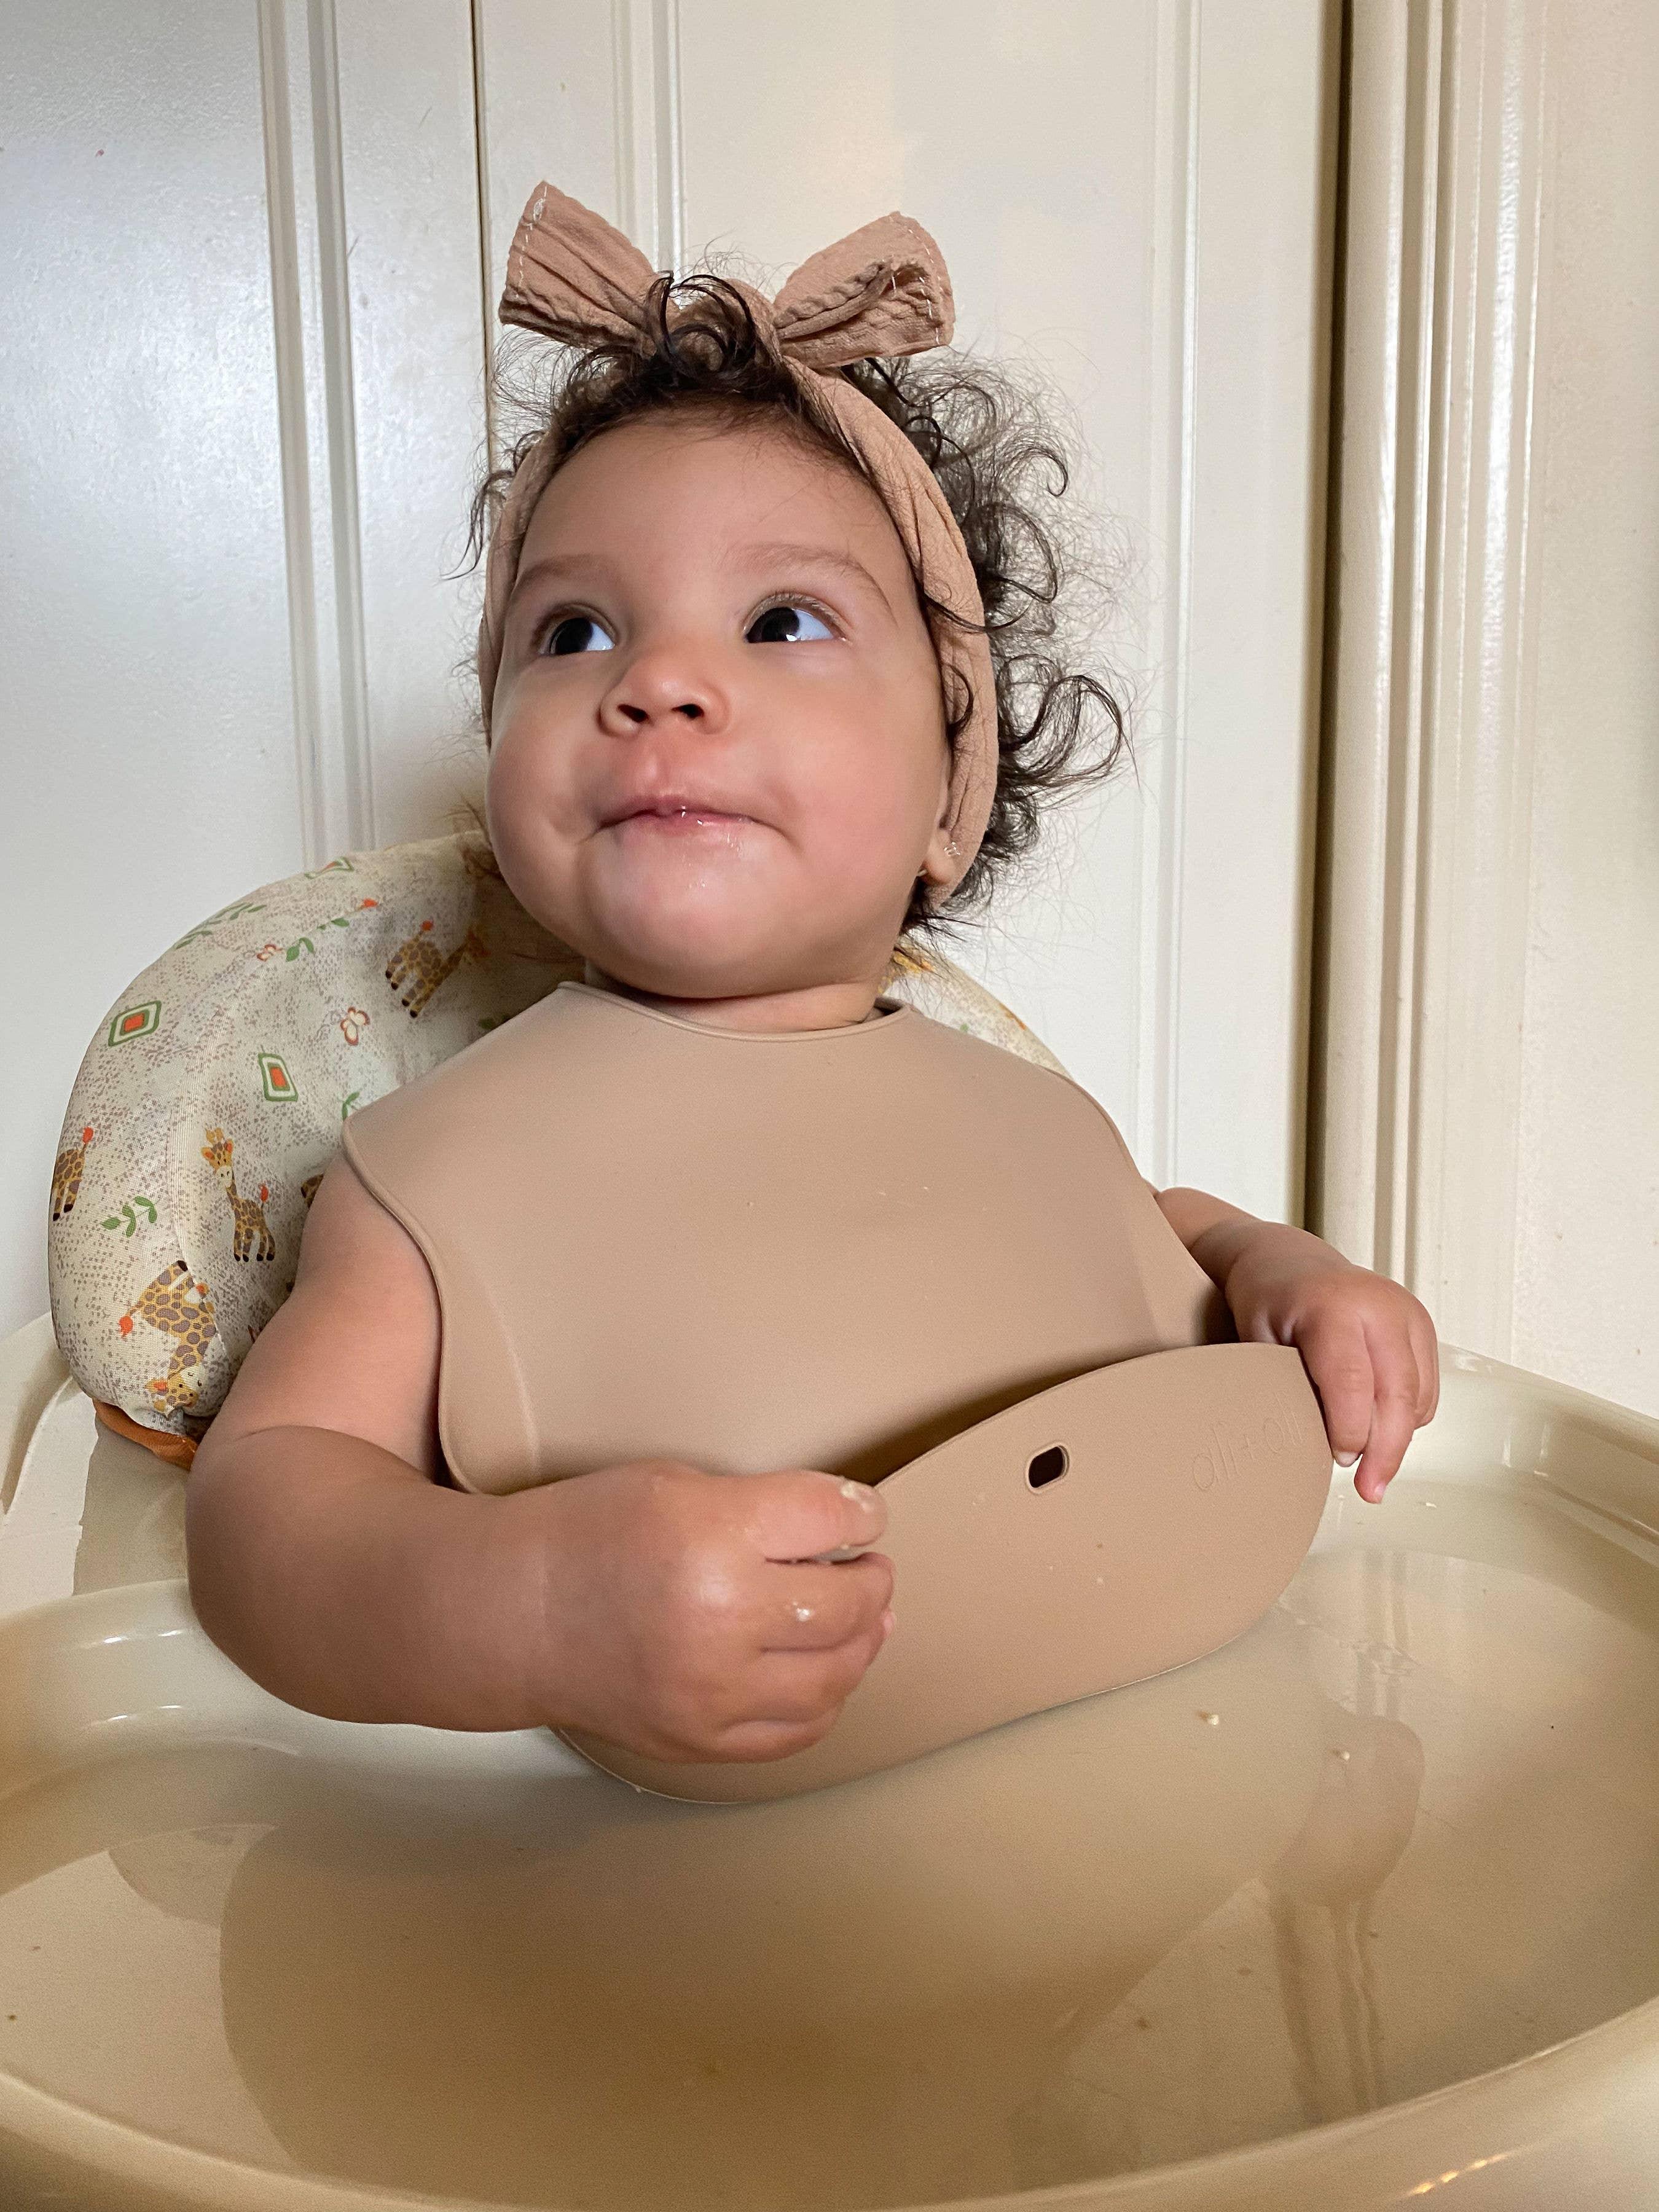 Silicone Baby Bib in Taupe - Silicone Baby Bib in Taupe - undefined - Salt and Honey